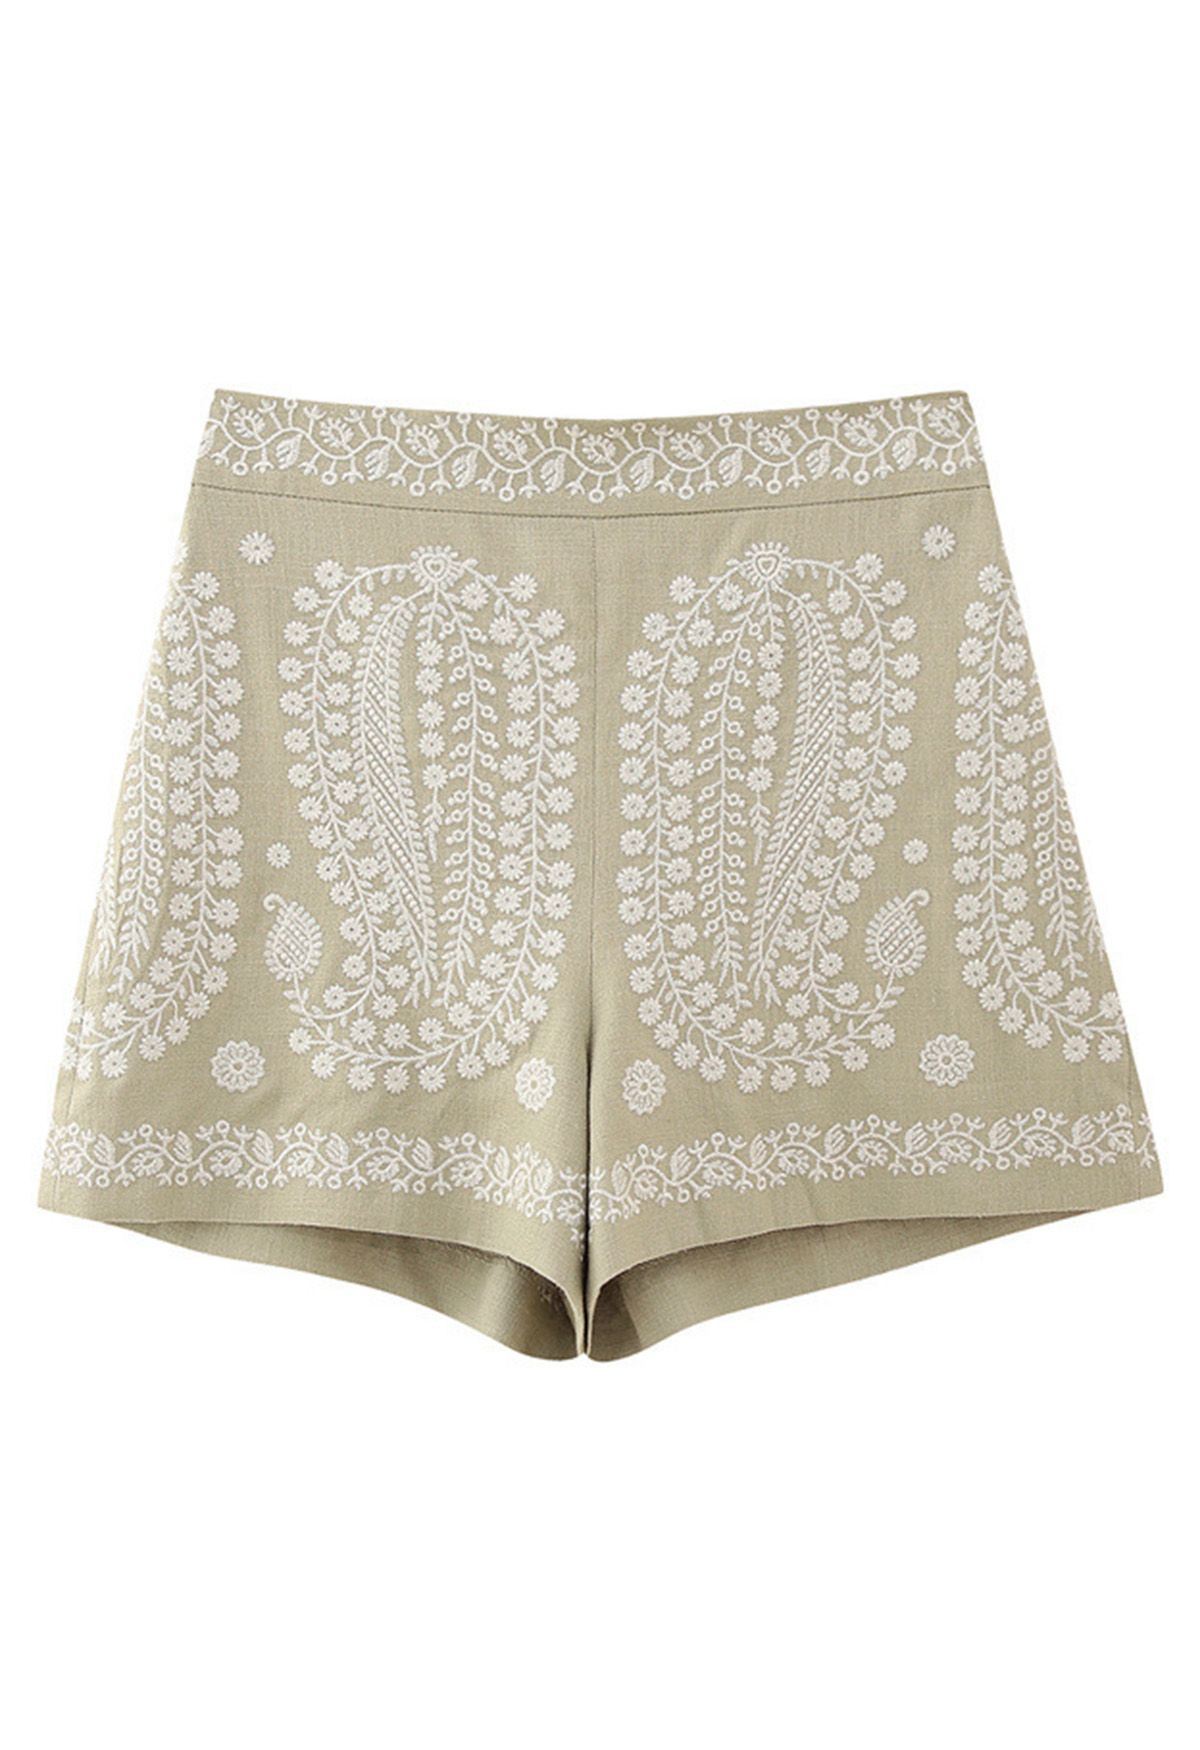 Vintage Embroidered High Waist Shorts in Oatmeal